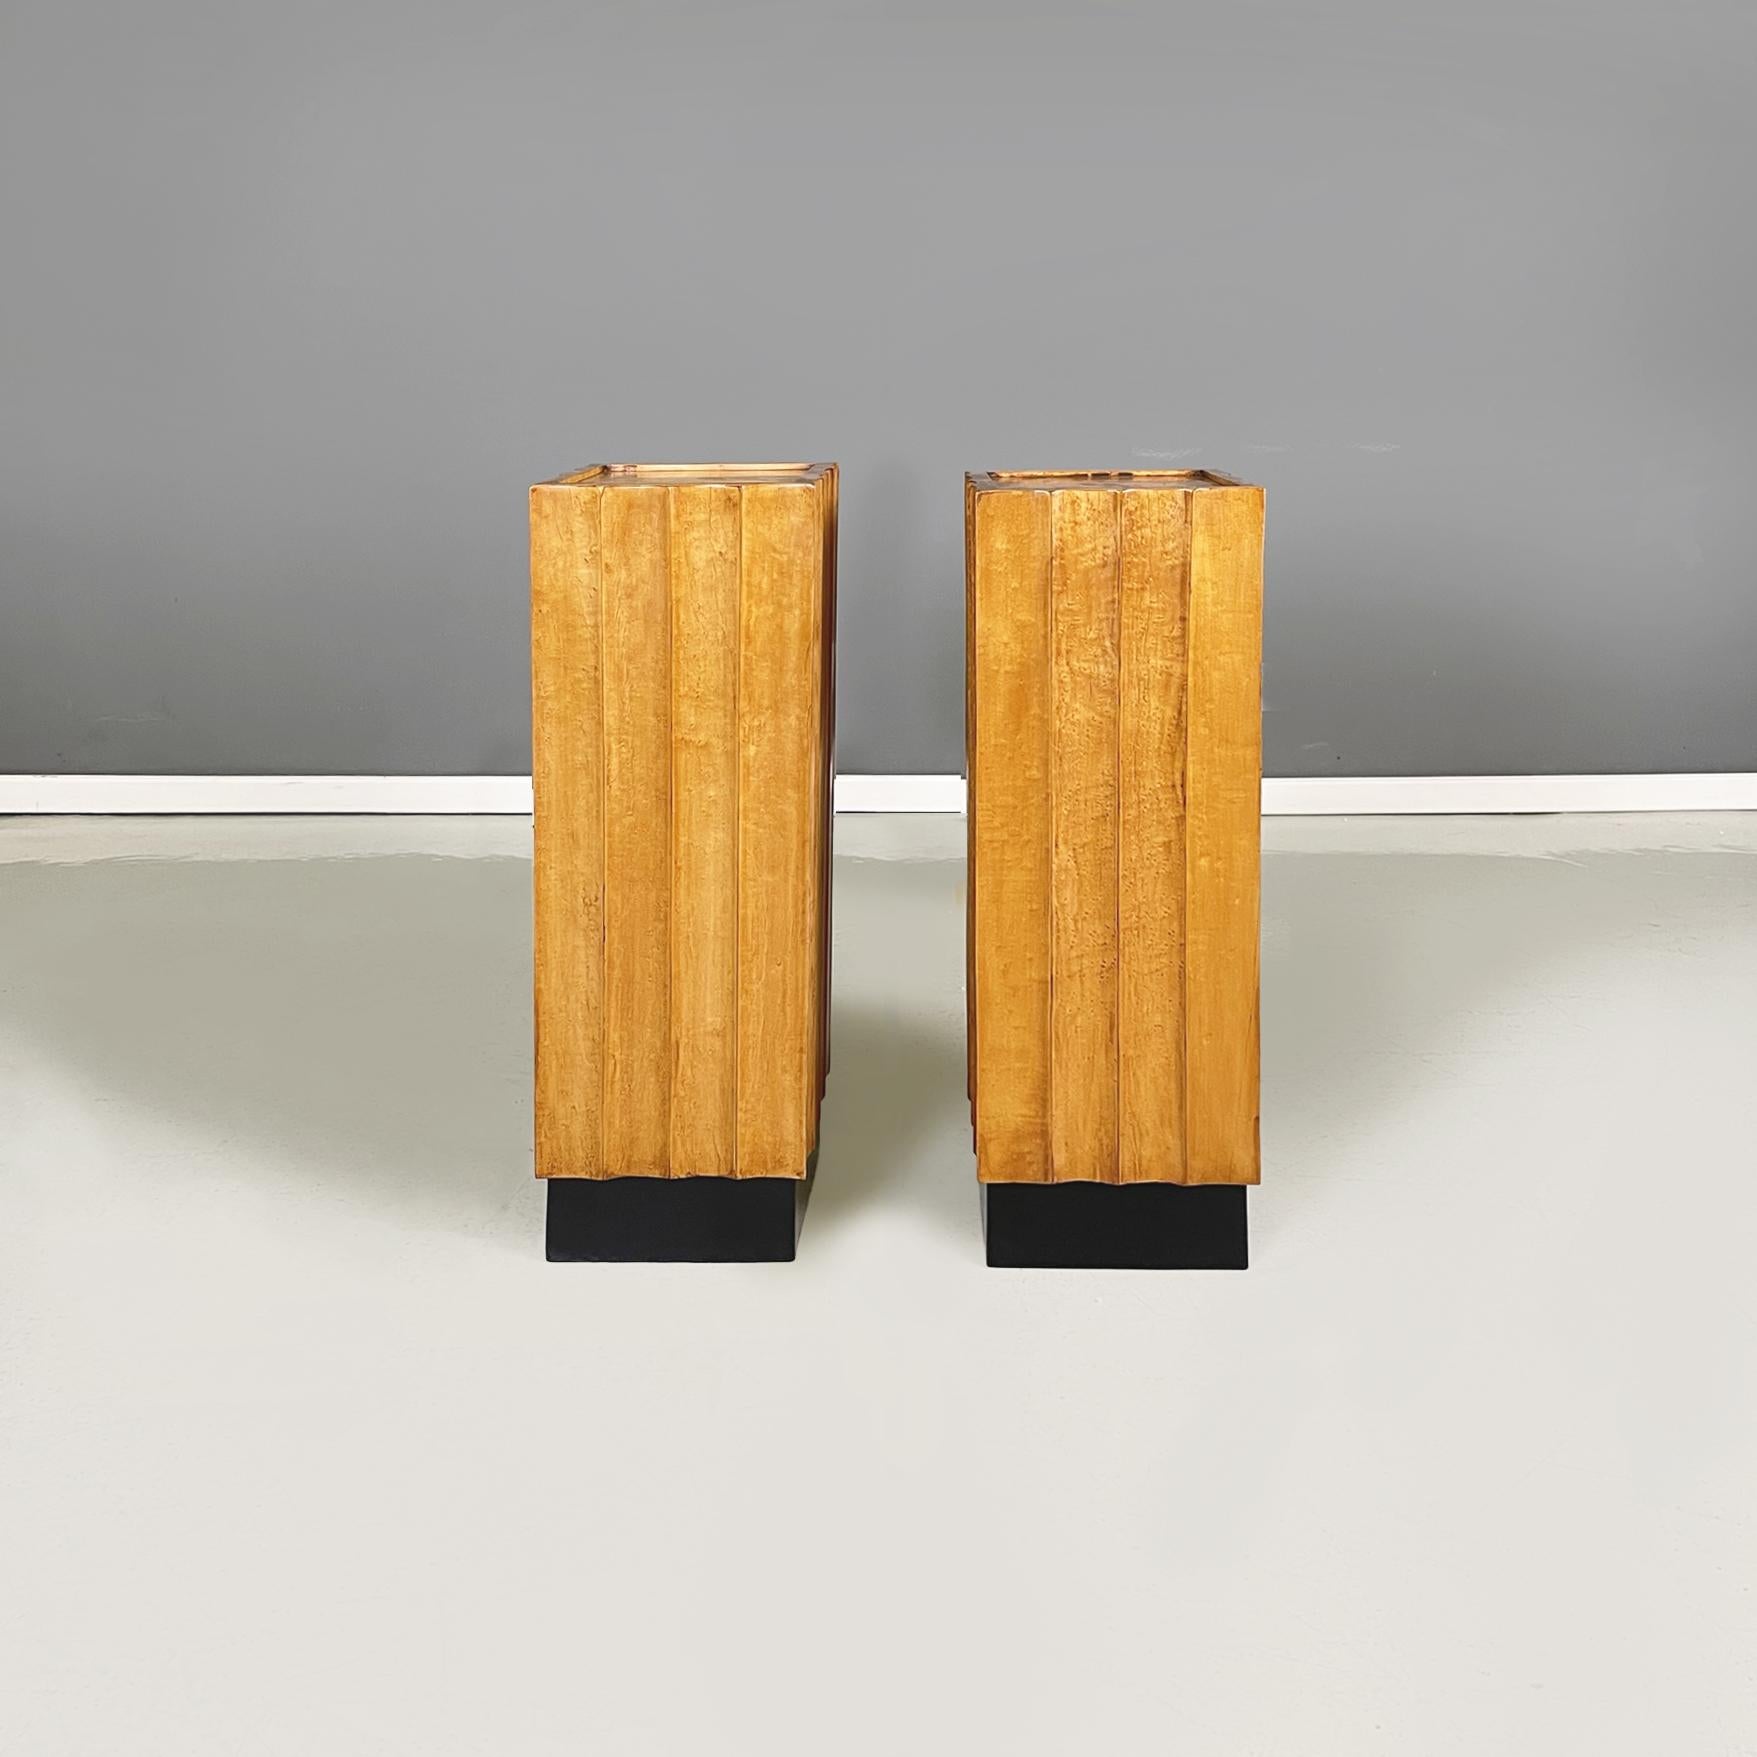 Italian Midcentury Black Light Wooden Square Pedestals with Wavy Profile, 1960s In Good Condition For Sale In MIlano, IT